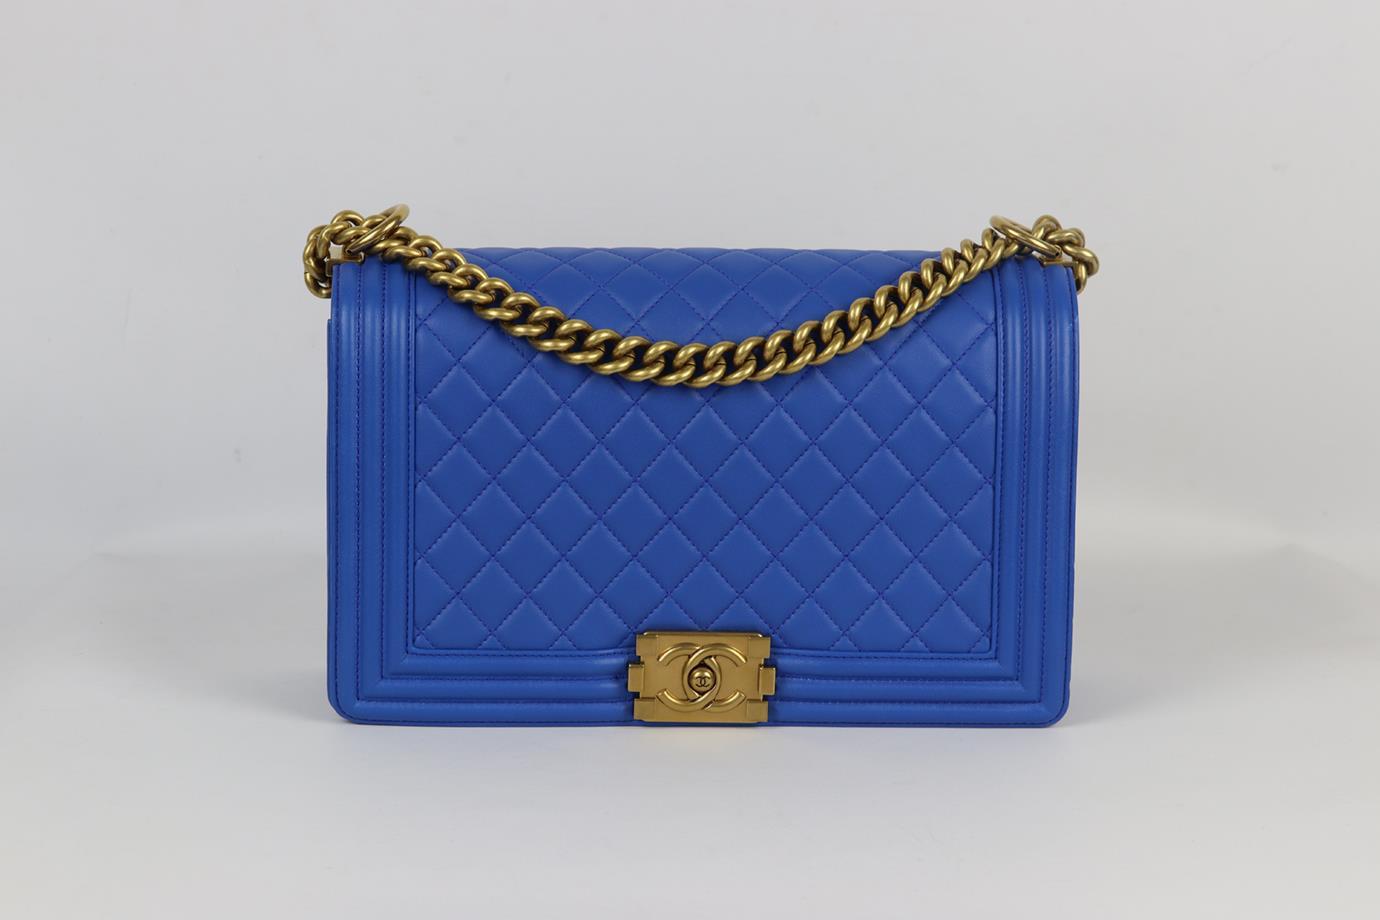 <ul>
<li>Chanel 2015 Boy large quilted leather shoulder bag.</li>
<li>Made from blue-tone quilted leather with matching leather interior and antiqued-gold hardware chain shoulder straps.</li>
<li>Blue.</li>
<li>Push lock fastening at